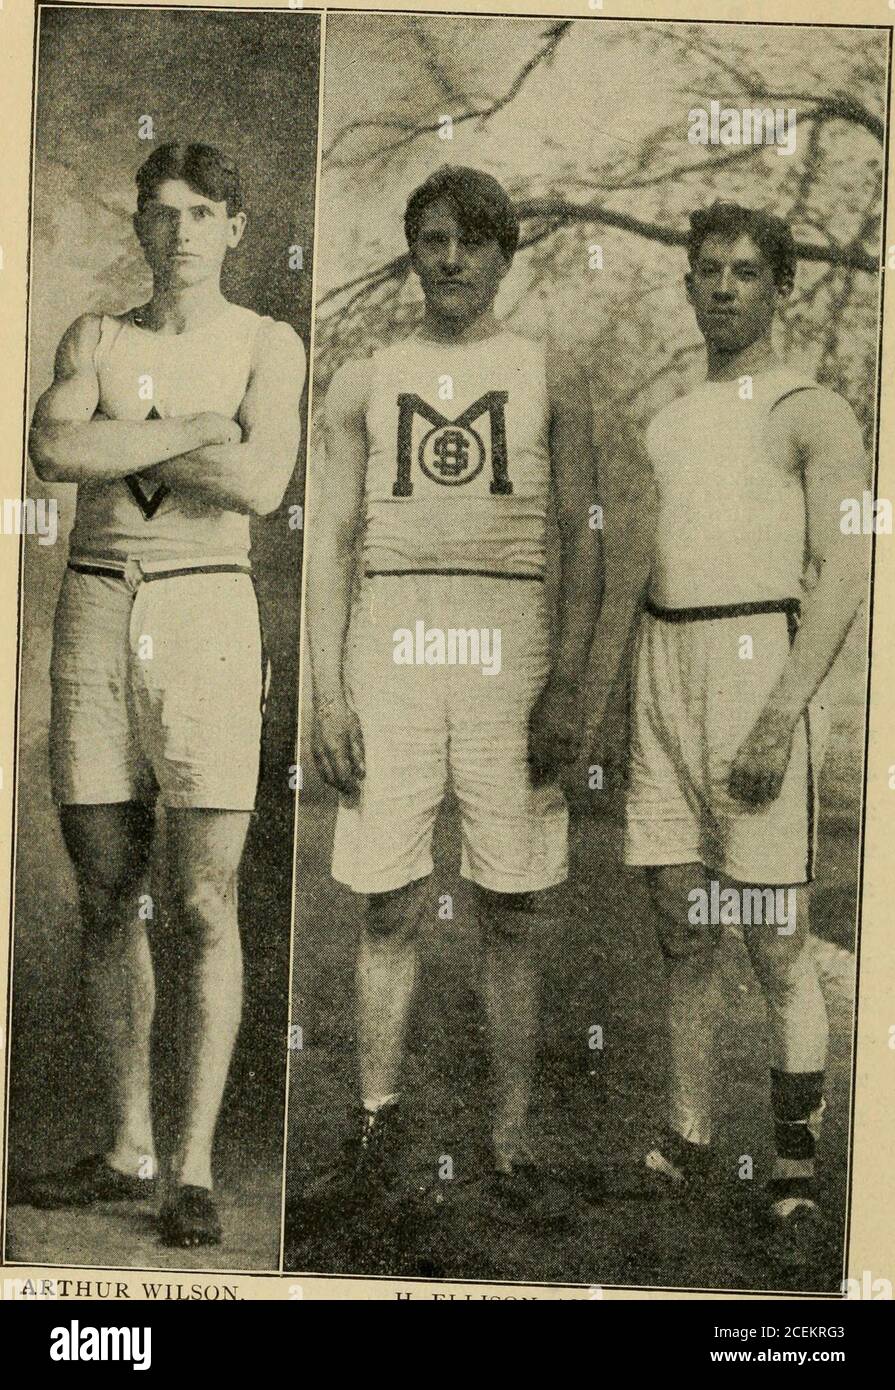 . Spalding's official athletic almanac. ll, second; Rogers, Cornell, third.1-2 mile Iun—2m. 1 l-2s., Adsit, Princeton, won; Overman, Cornell, second; Schutt, Cornell, third.Putting shot—44ft. 5 l-2in., Dewitt, Princeton, won; Porter, Cornell, 43ft. 4 l-2in., second; Moxley, Cornell, 38ft. lOin., third.Pole vault—lOft. 9in., Carroll, Cornell, won; Horton, Princeton, and Moore, Princeton, tied for second and third at 10ft. 3in.High jump—Tooker, Princeton, Serviss, Cornell, and Porter, Cornell, tied for the three places at 5ft. 10 l-2in.Throwing hammer—164ft. 5in., Dewitt, Princeton, won; Moxley, Stock Photo